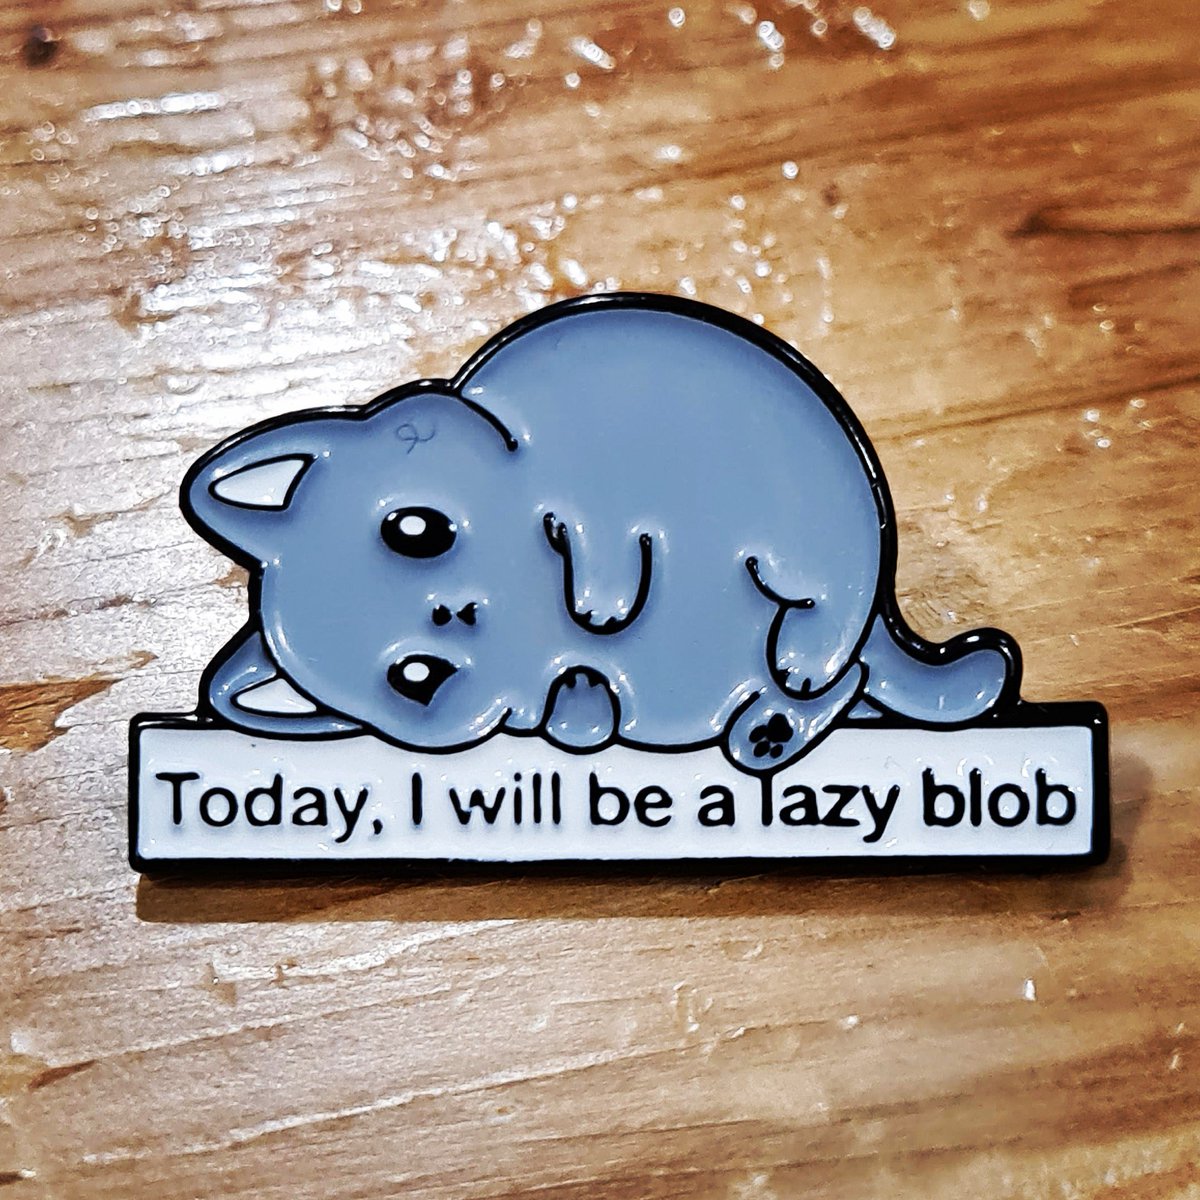 Dear day-before-a-public-holiday, I have a pin for you! #LazyBlob #PinAddict